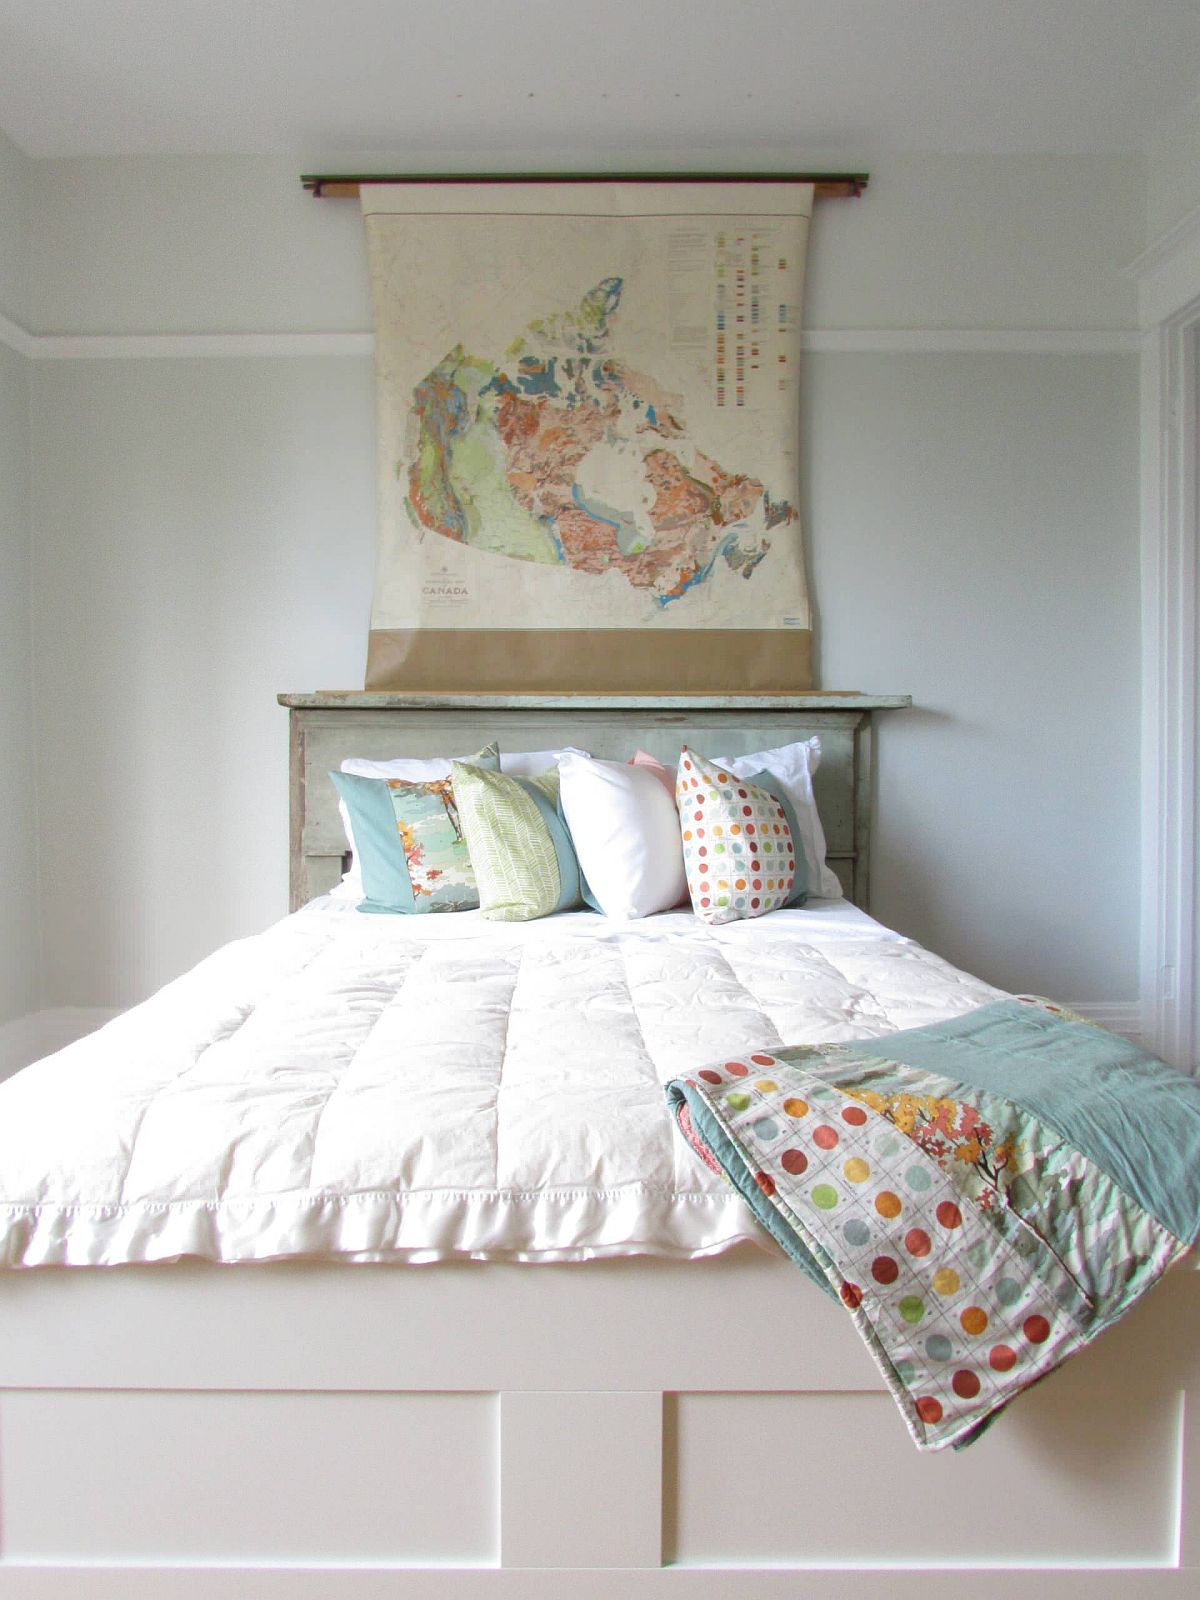 Shabby-chic-bedroom-in-white-where-the-map-above-the-headboard-usher-in-color-94603